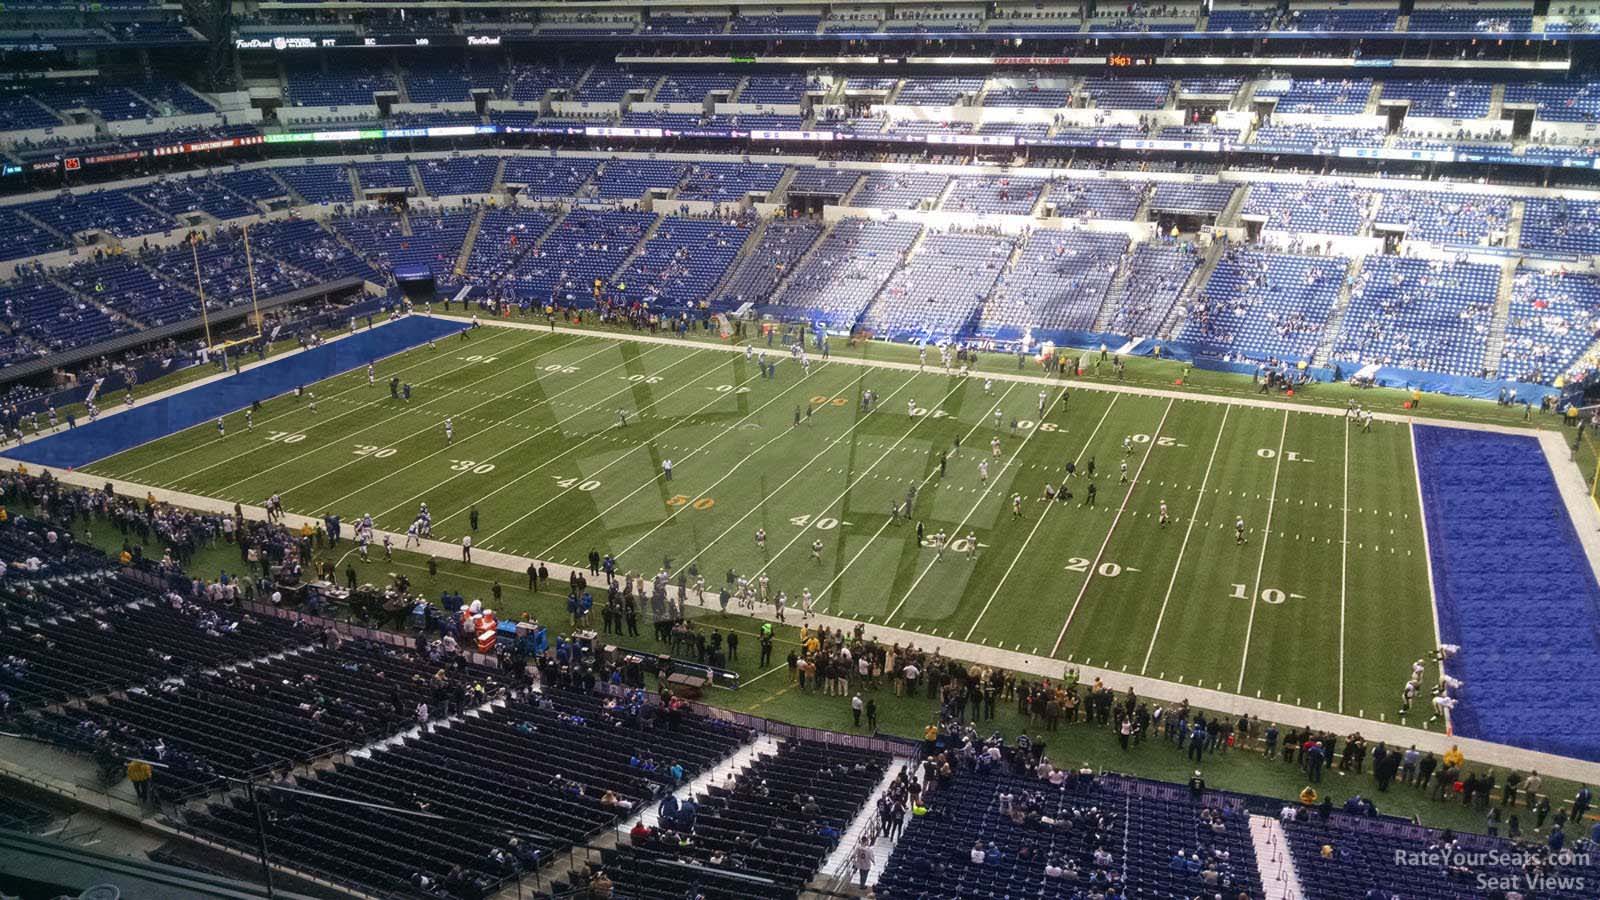 section 510, row 3 seat view  for football - lucas oil stadium